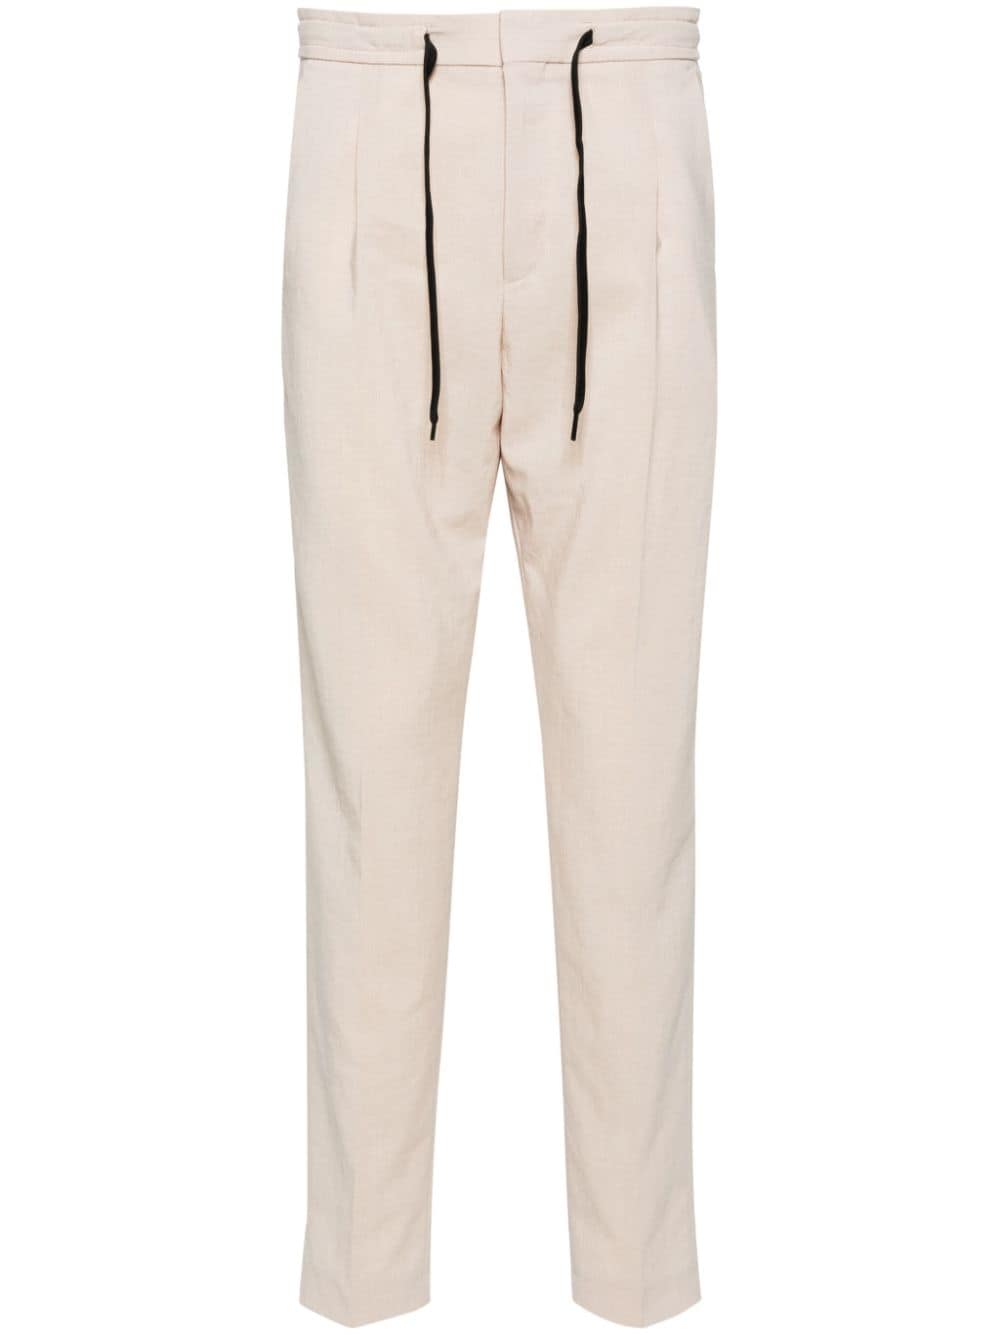 Teagan242X tapered trousers